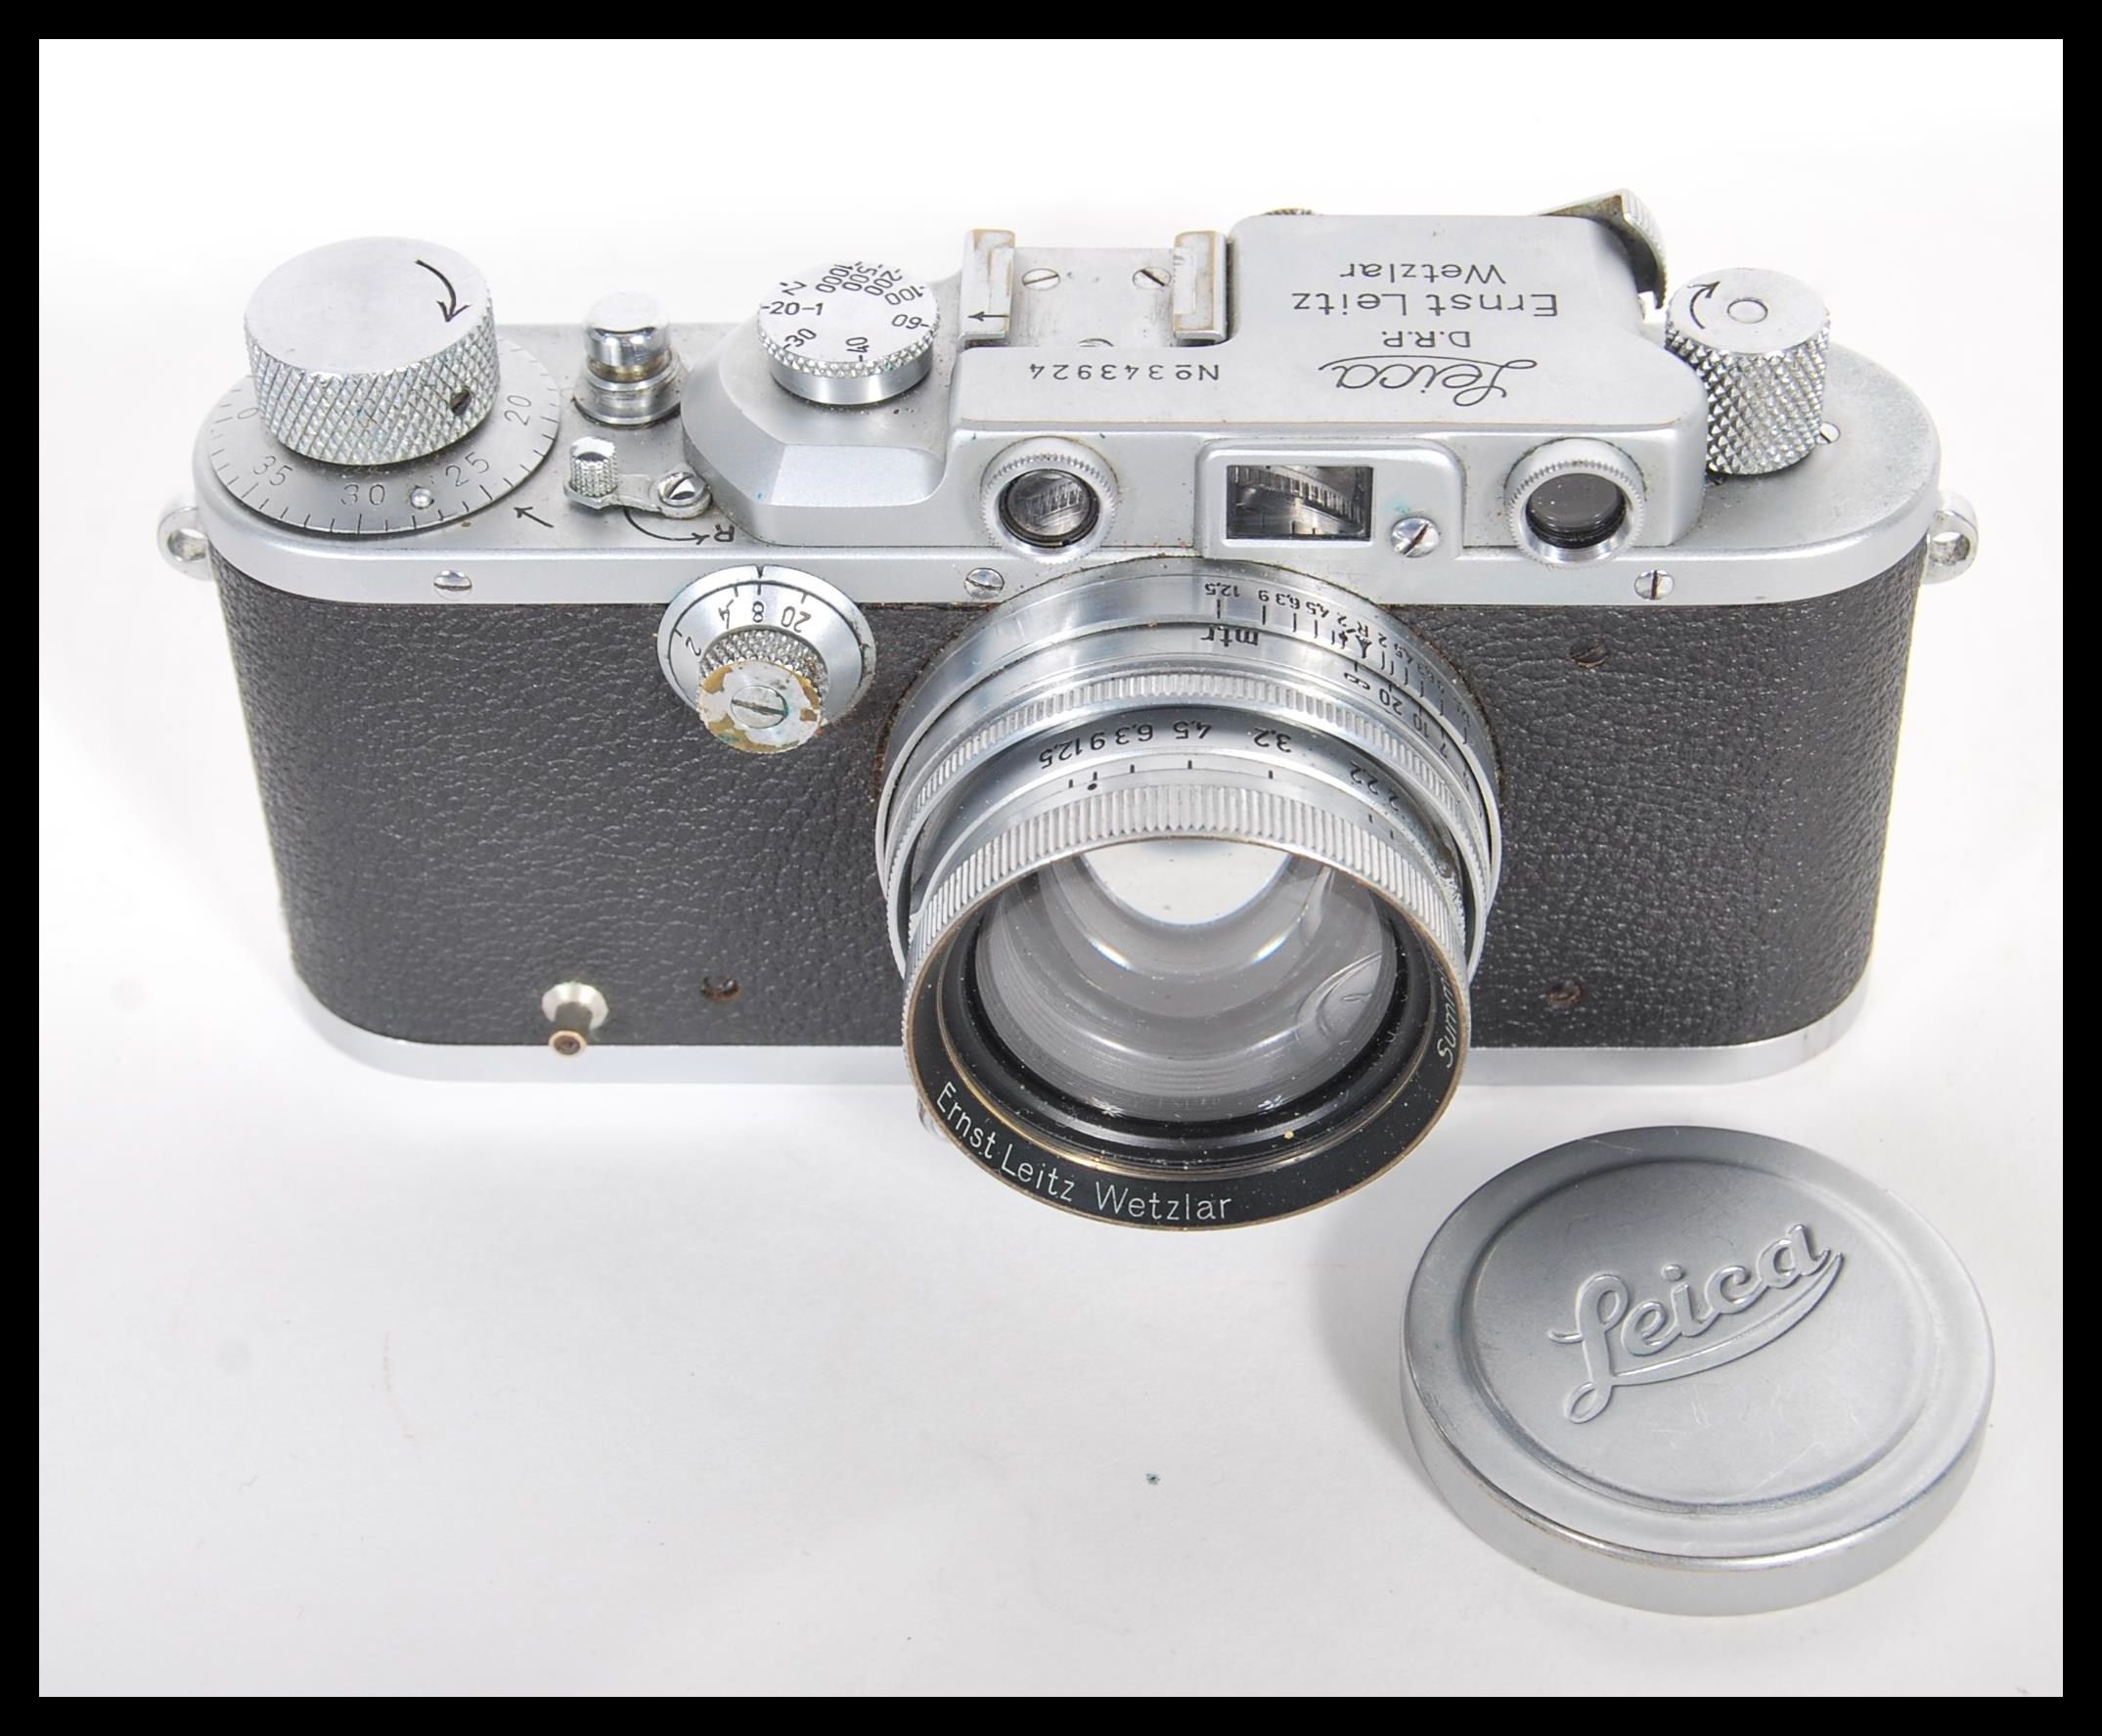 A Leica lll D.P.R Rangefinder chrome camera by Ernst Leitz Wetzlar Germany, Serial number 343924. - Image 2 of 7